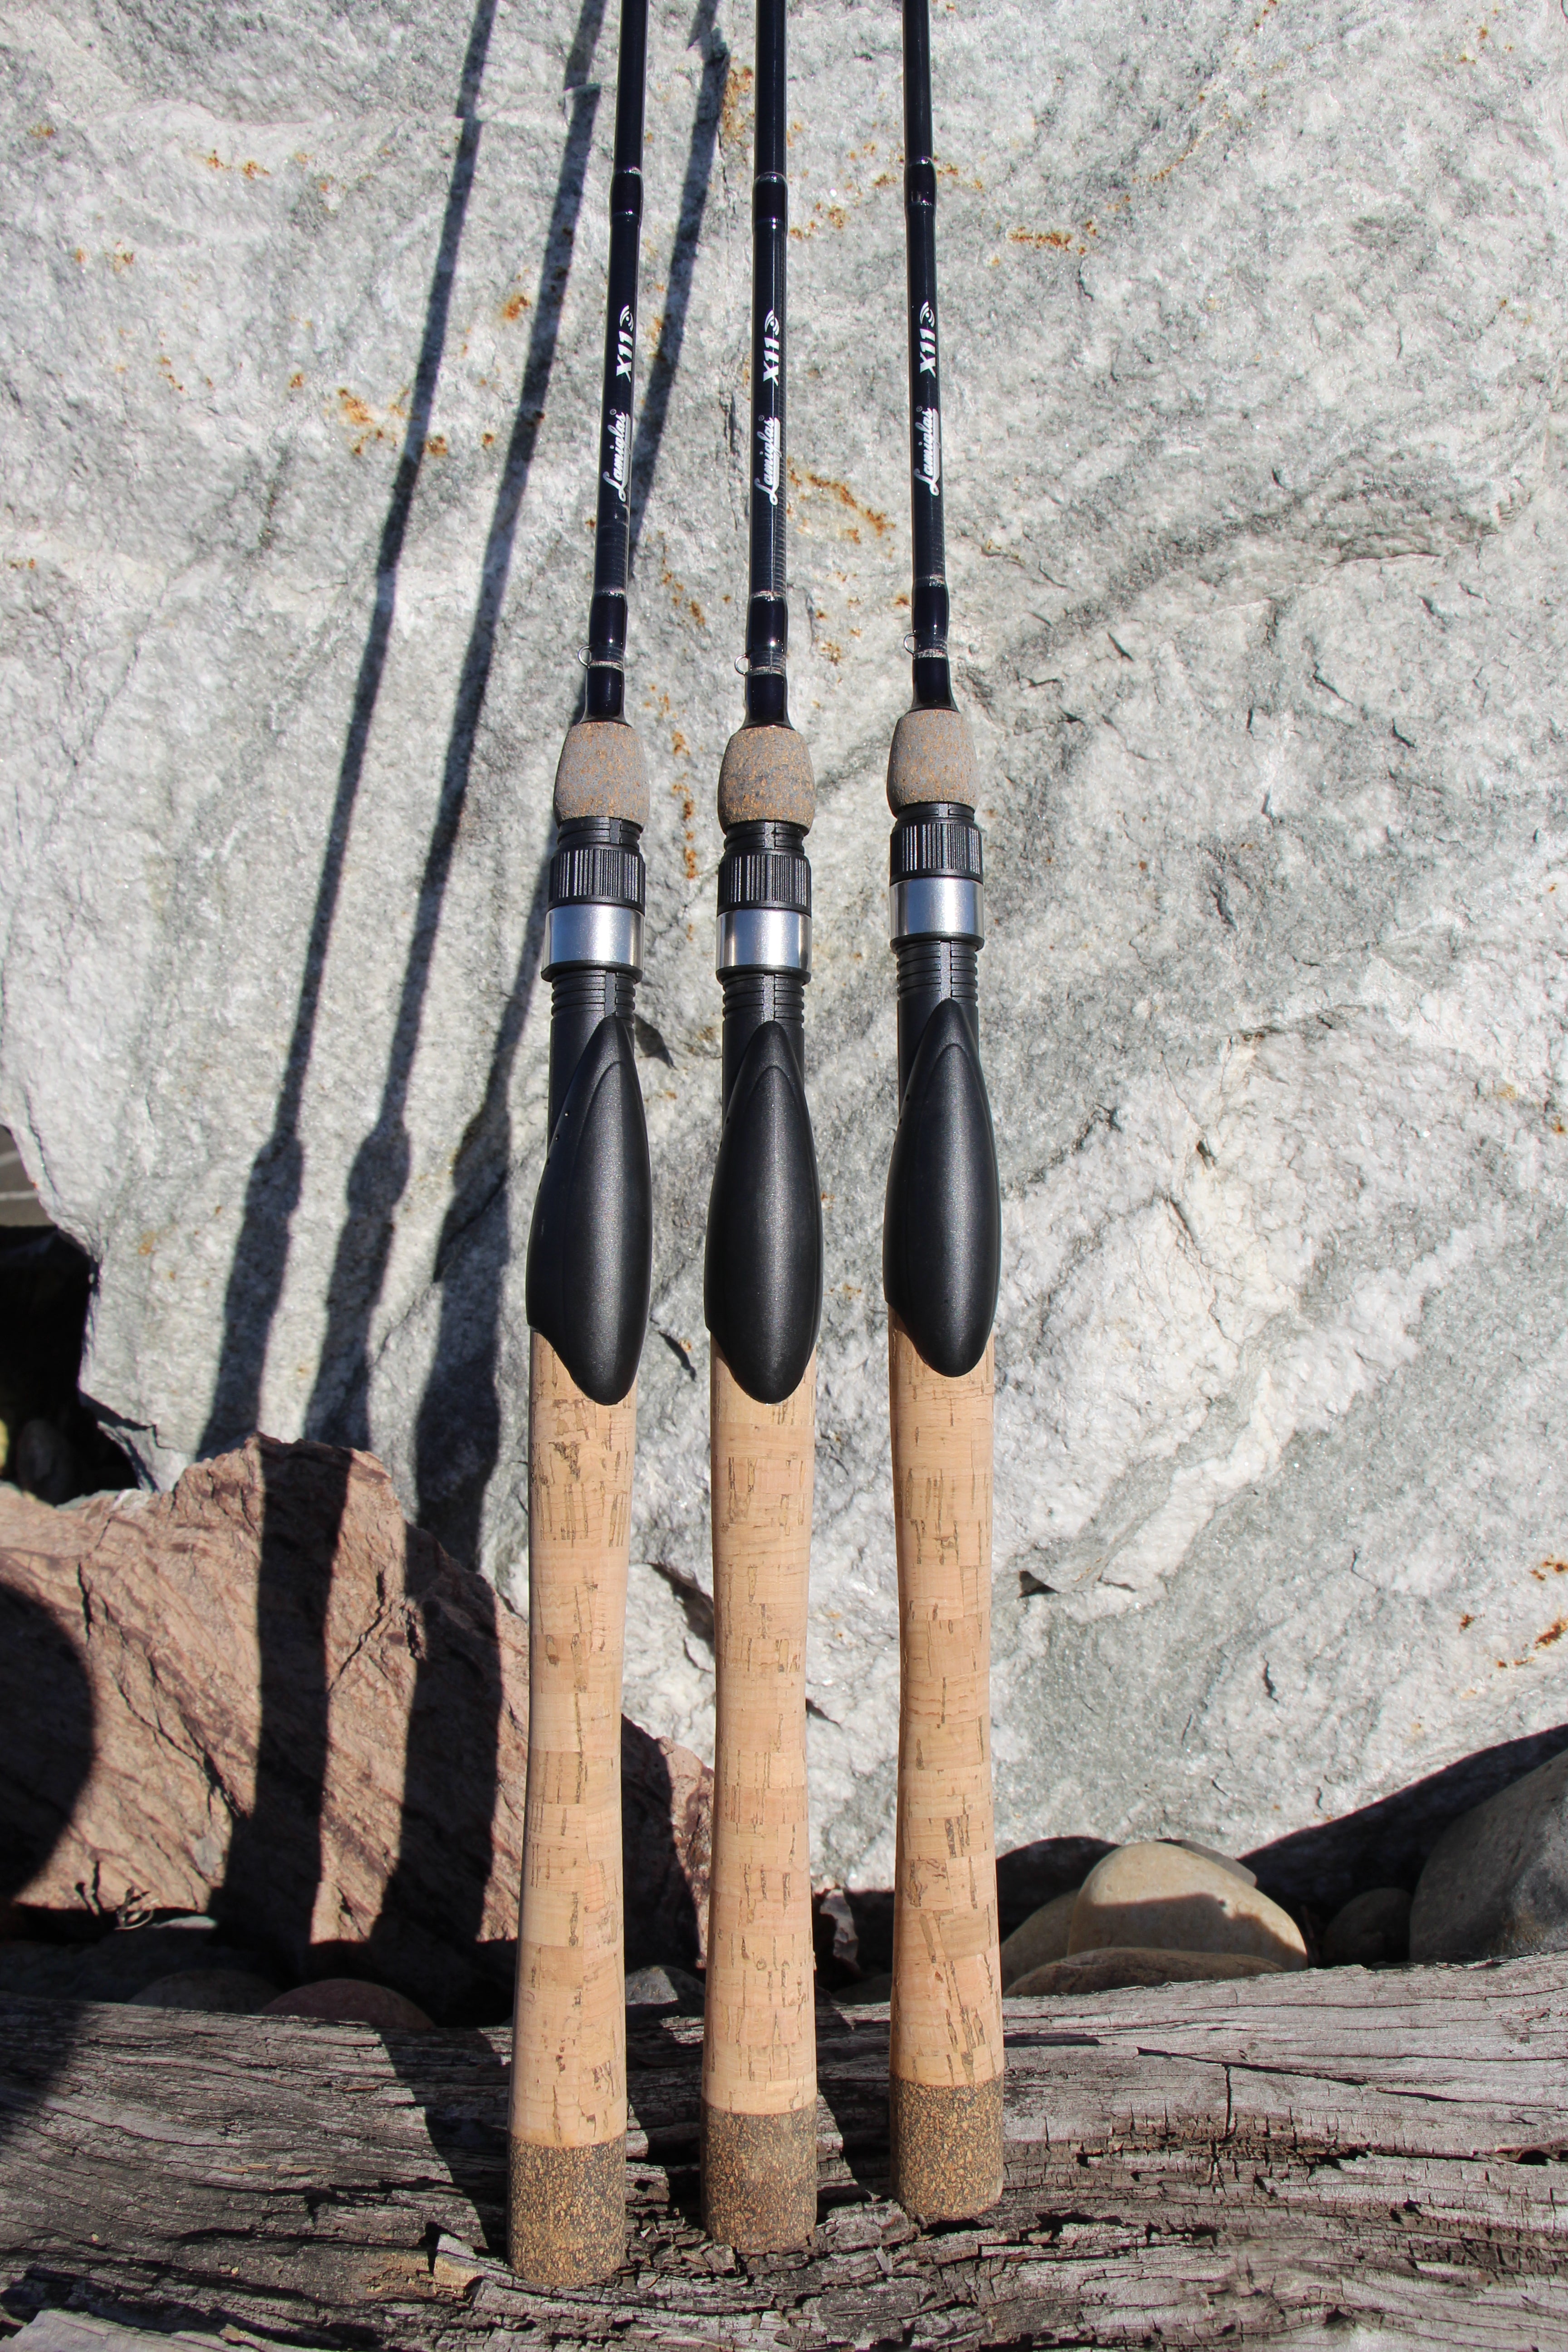 LX 702 ULS  7'0 2-8lb Spin (Panfish & Trout) and more products you're  sure to love - Lamiglas Fishing Rods